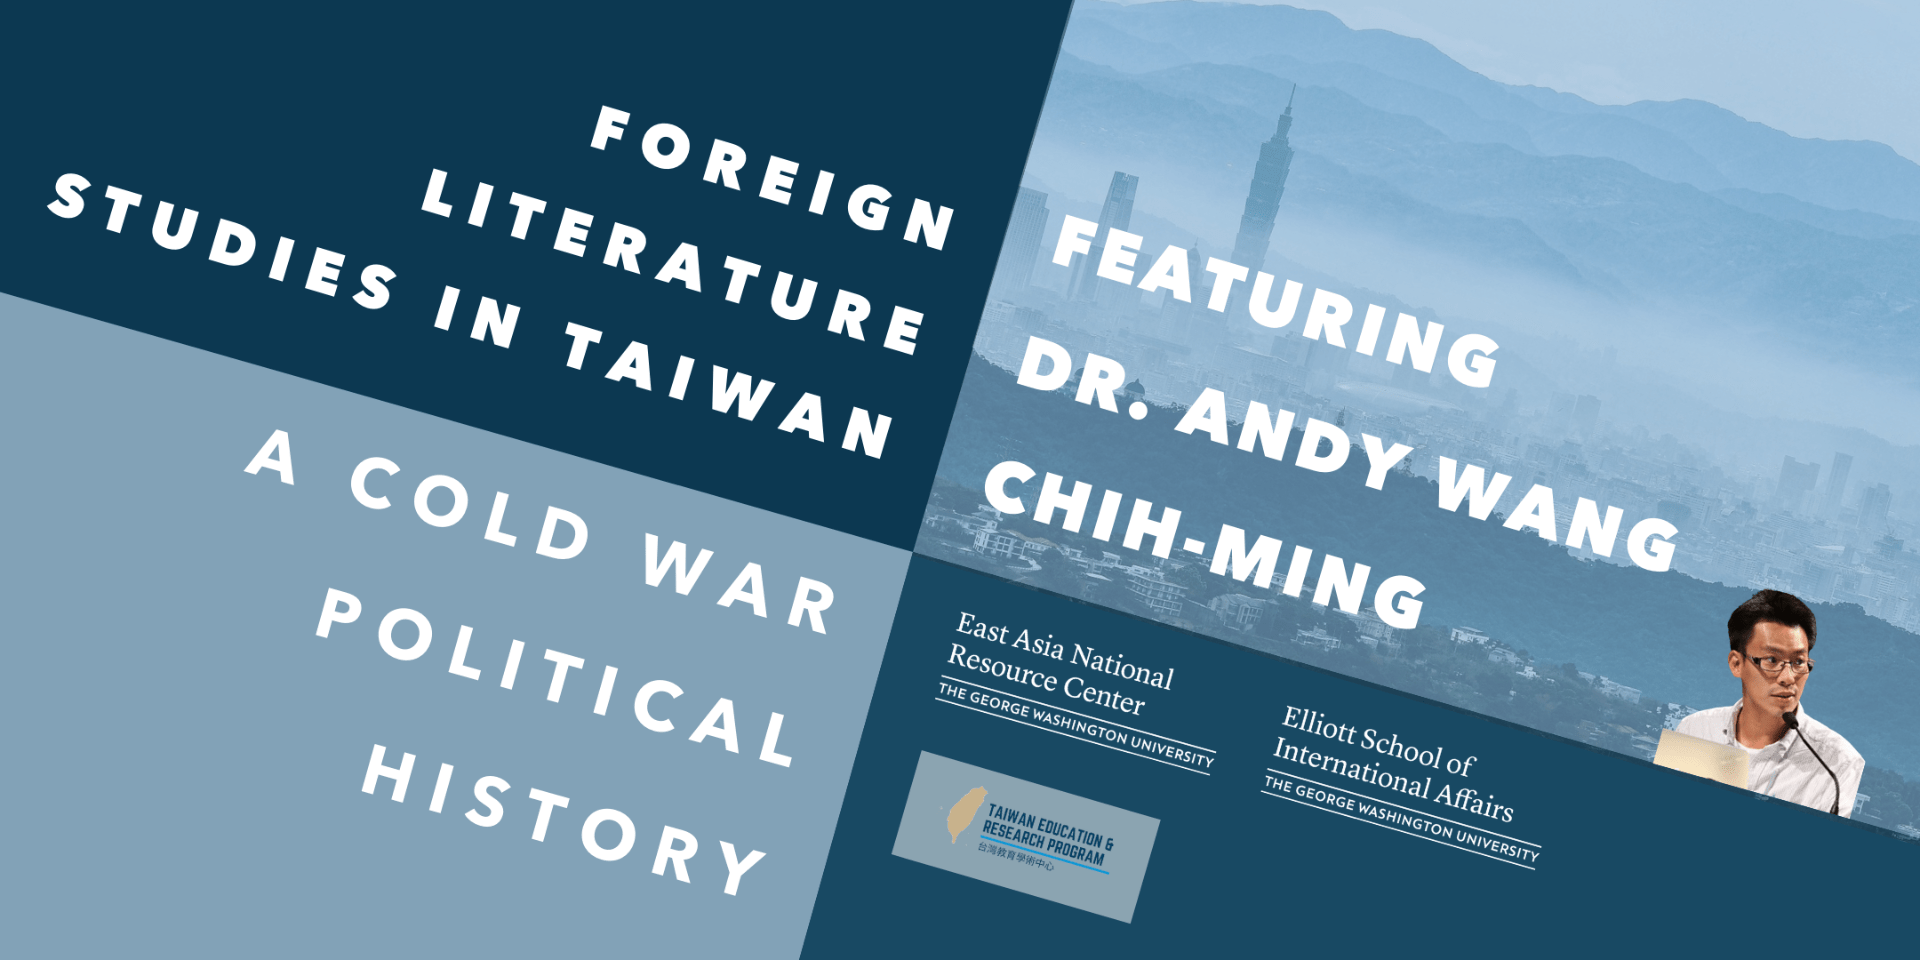 event banner for foreign literature in Taiwan event with Andy Wang